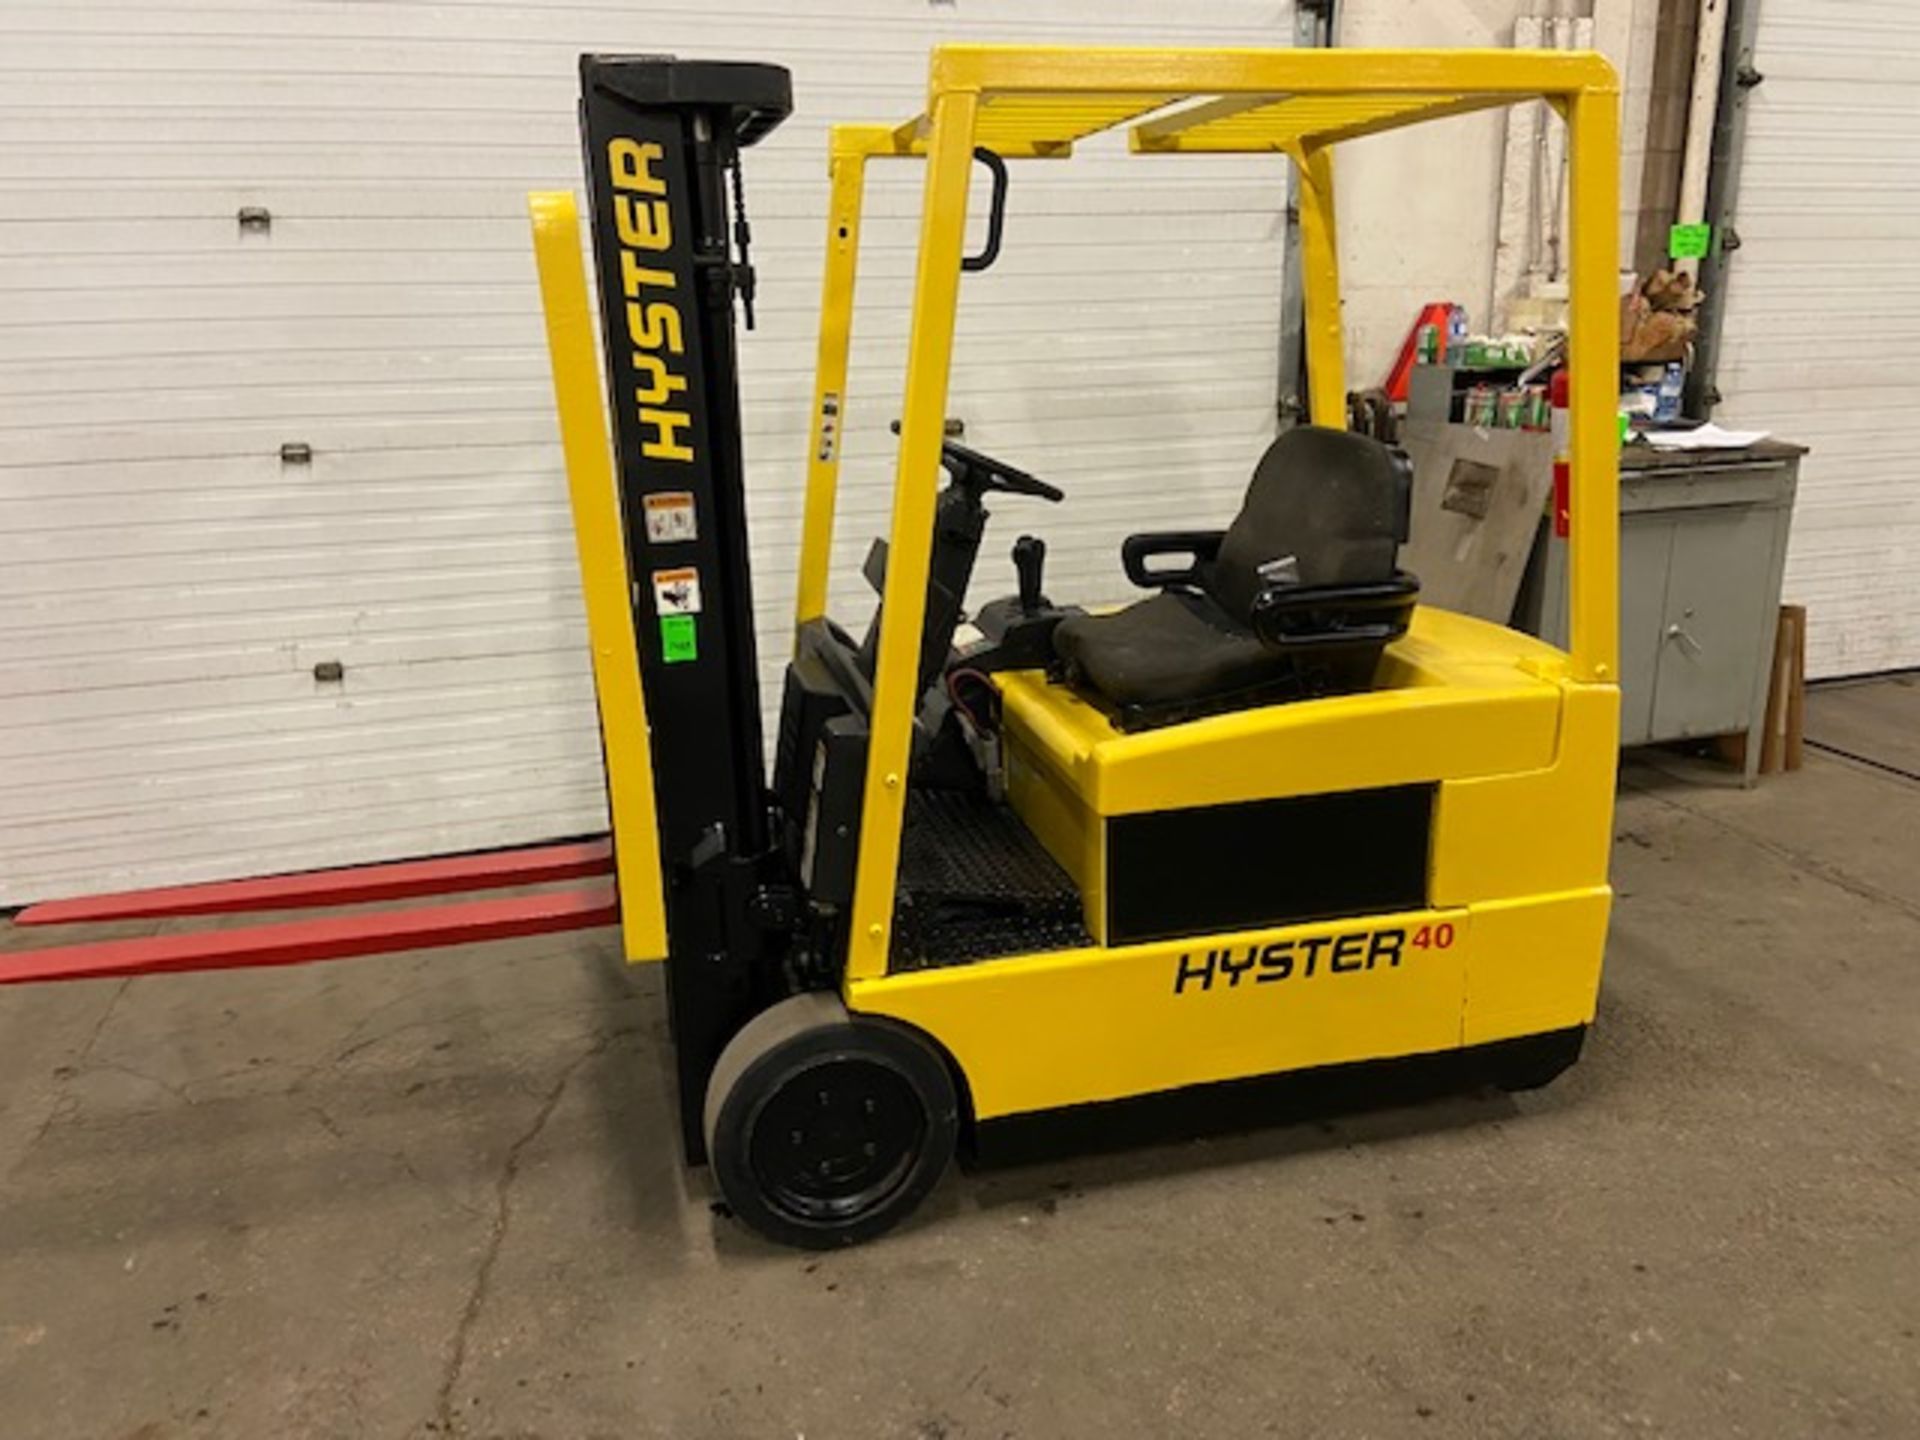 FREE CUSTOMS - Hyster 4000lbs Capacity 3-wheel Forklift Electric with 3-stage mast & LOW HOURS